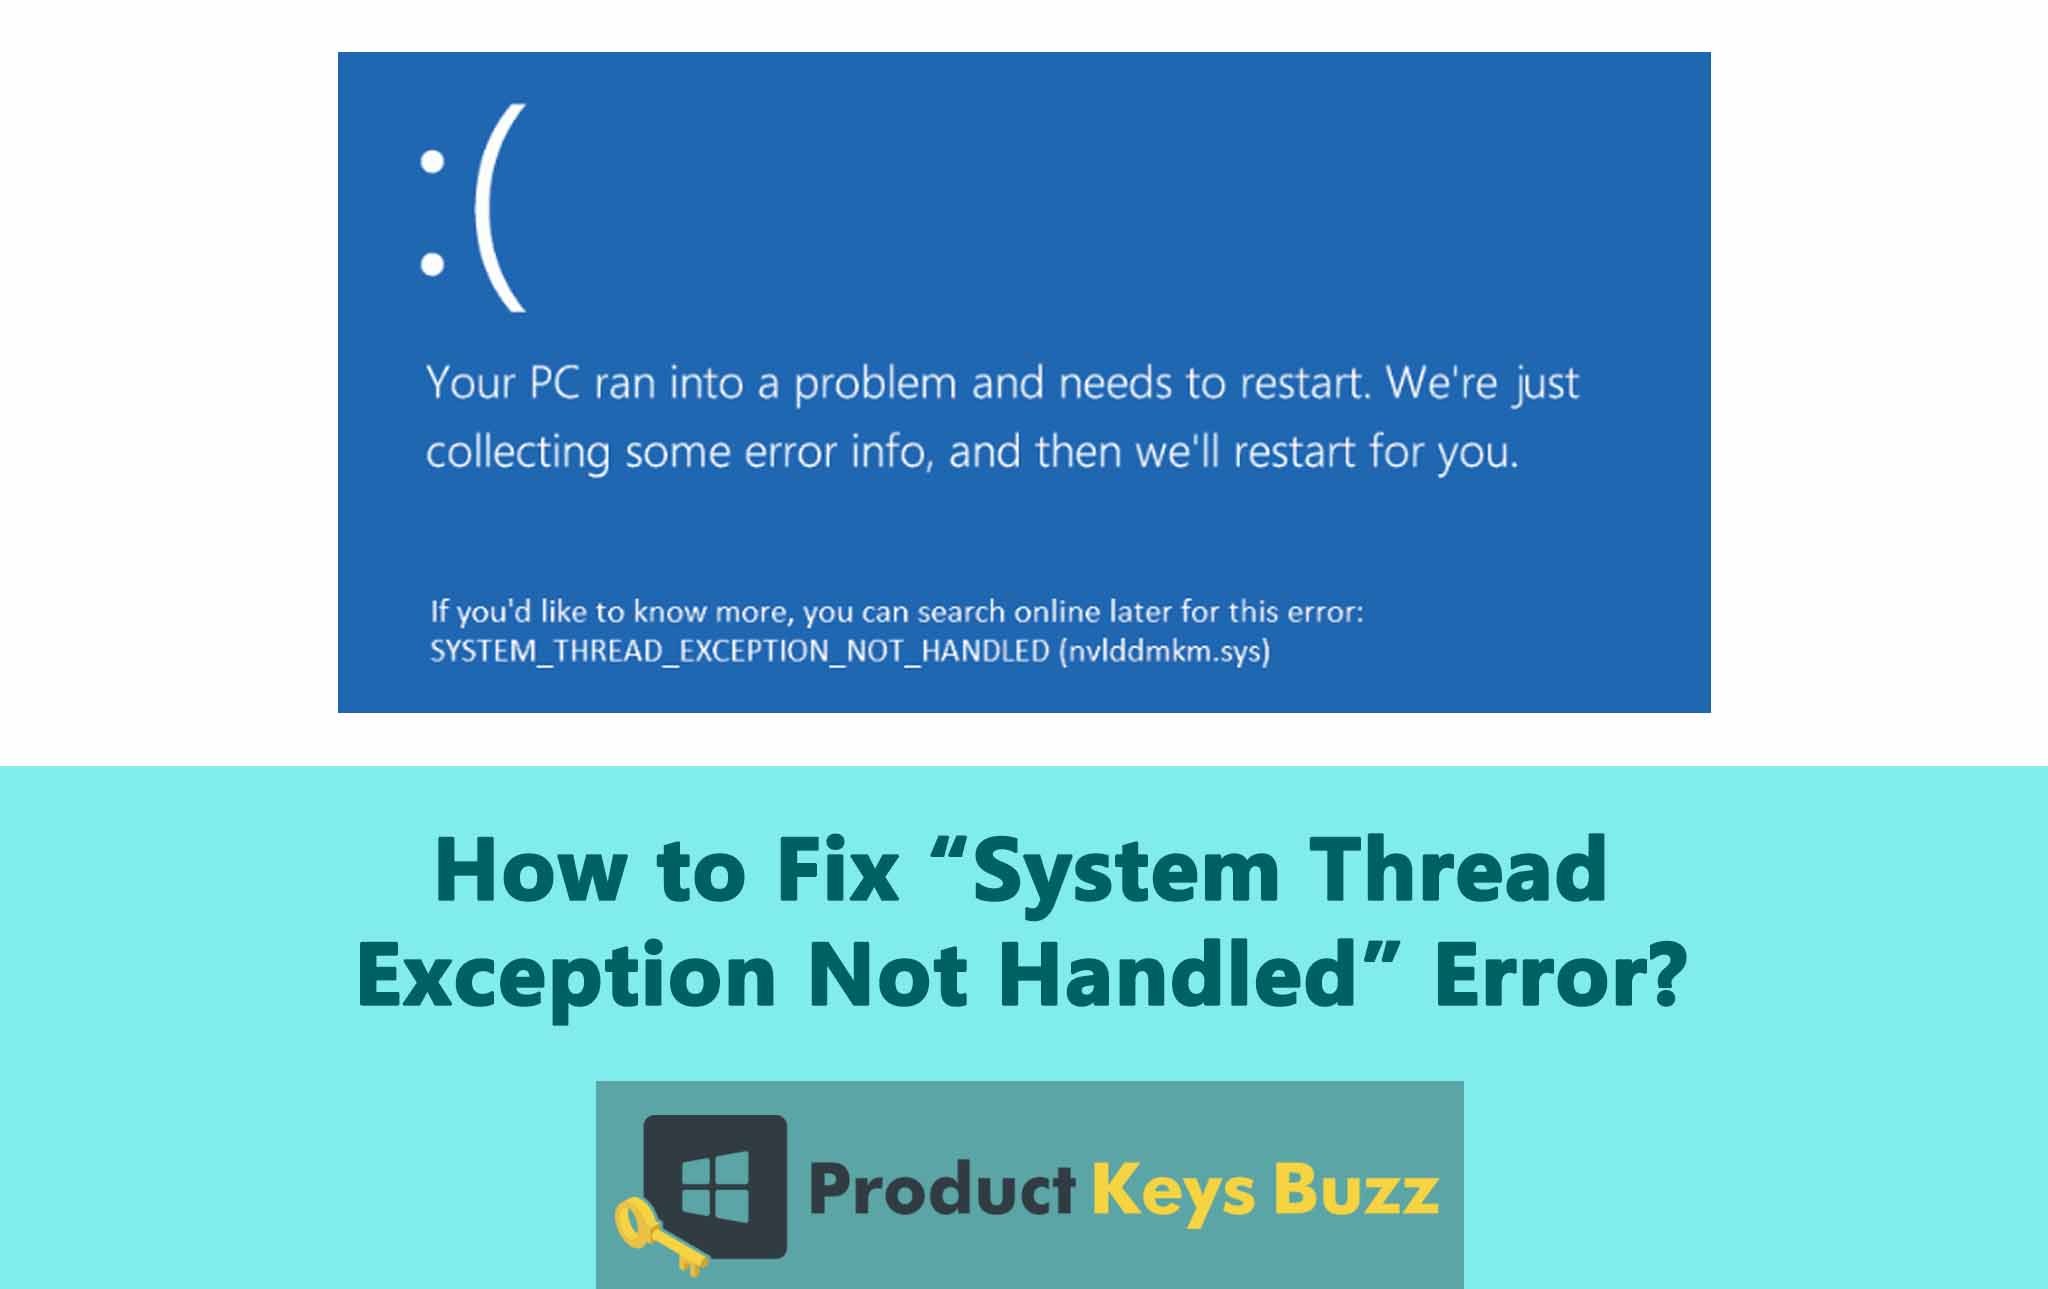 How to Fix “System Thread Exception Not Handled” Error